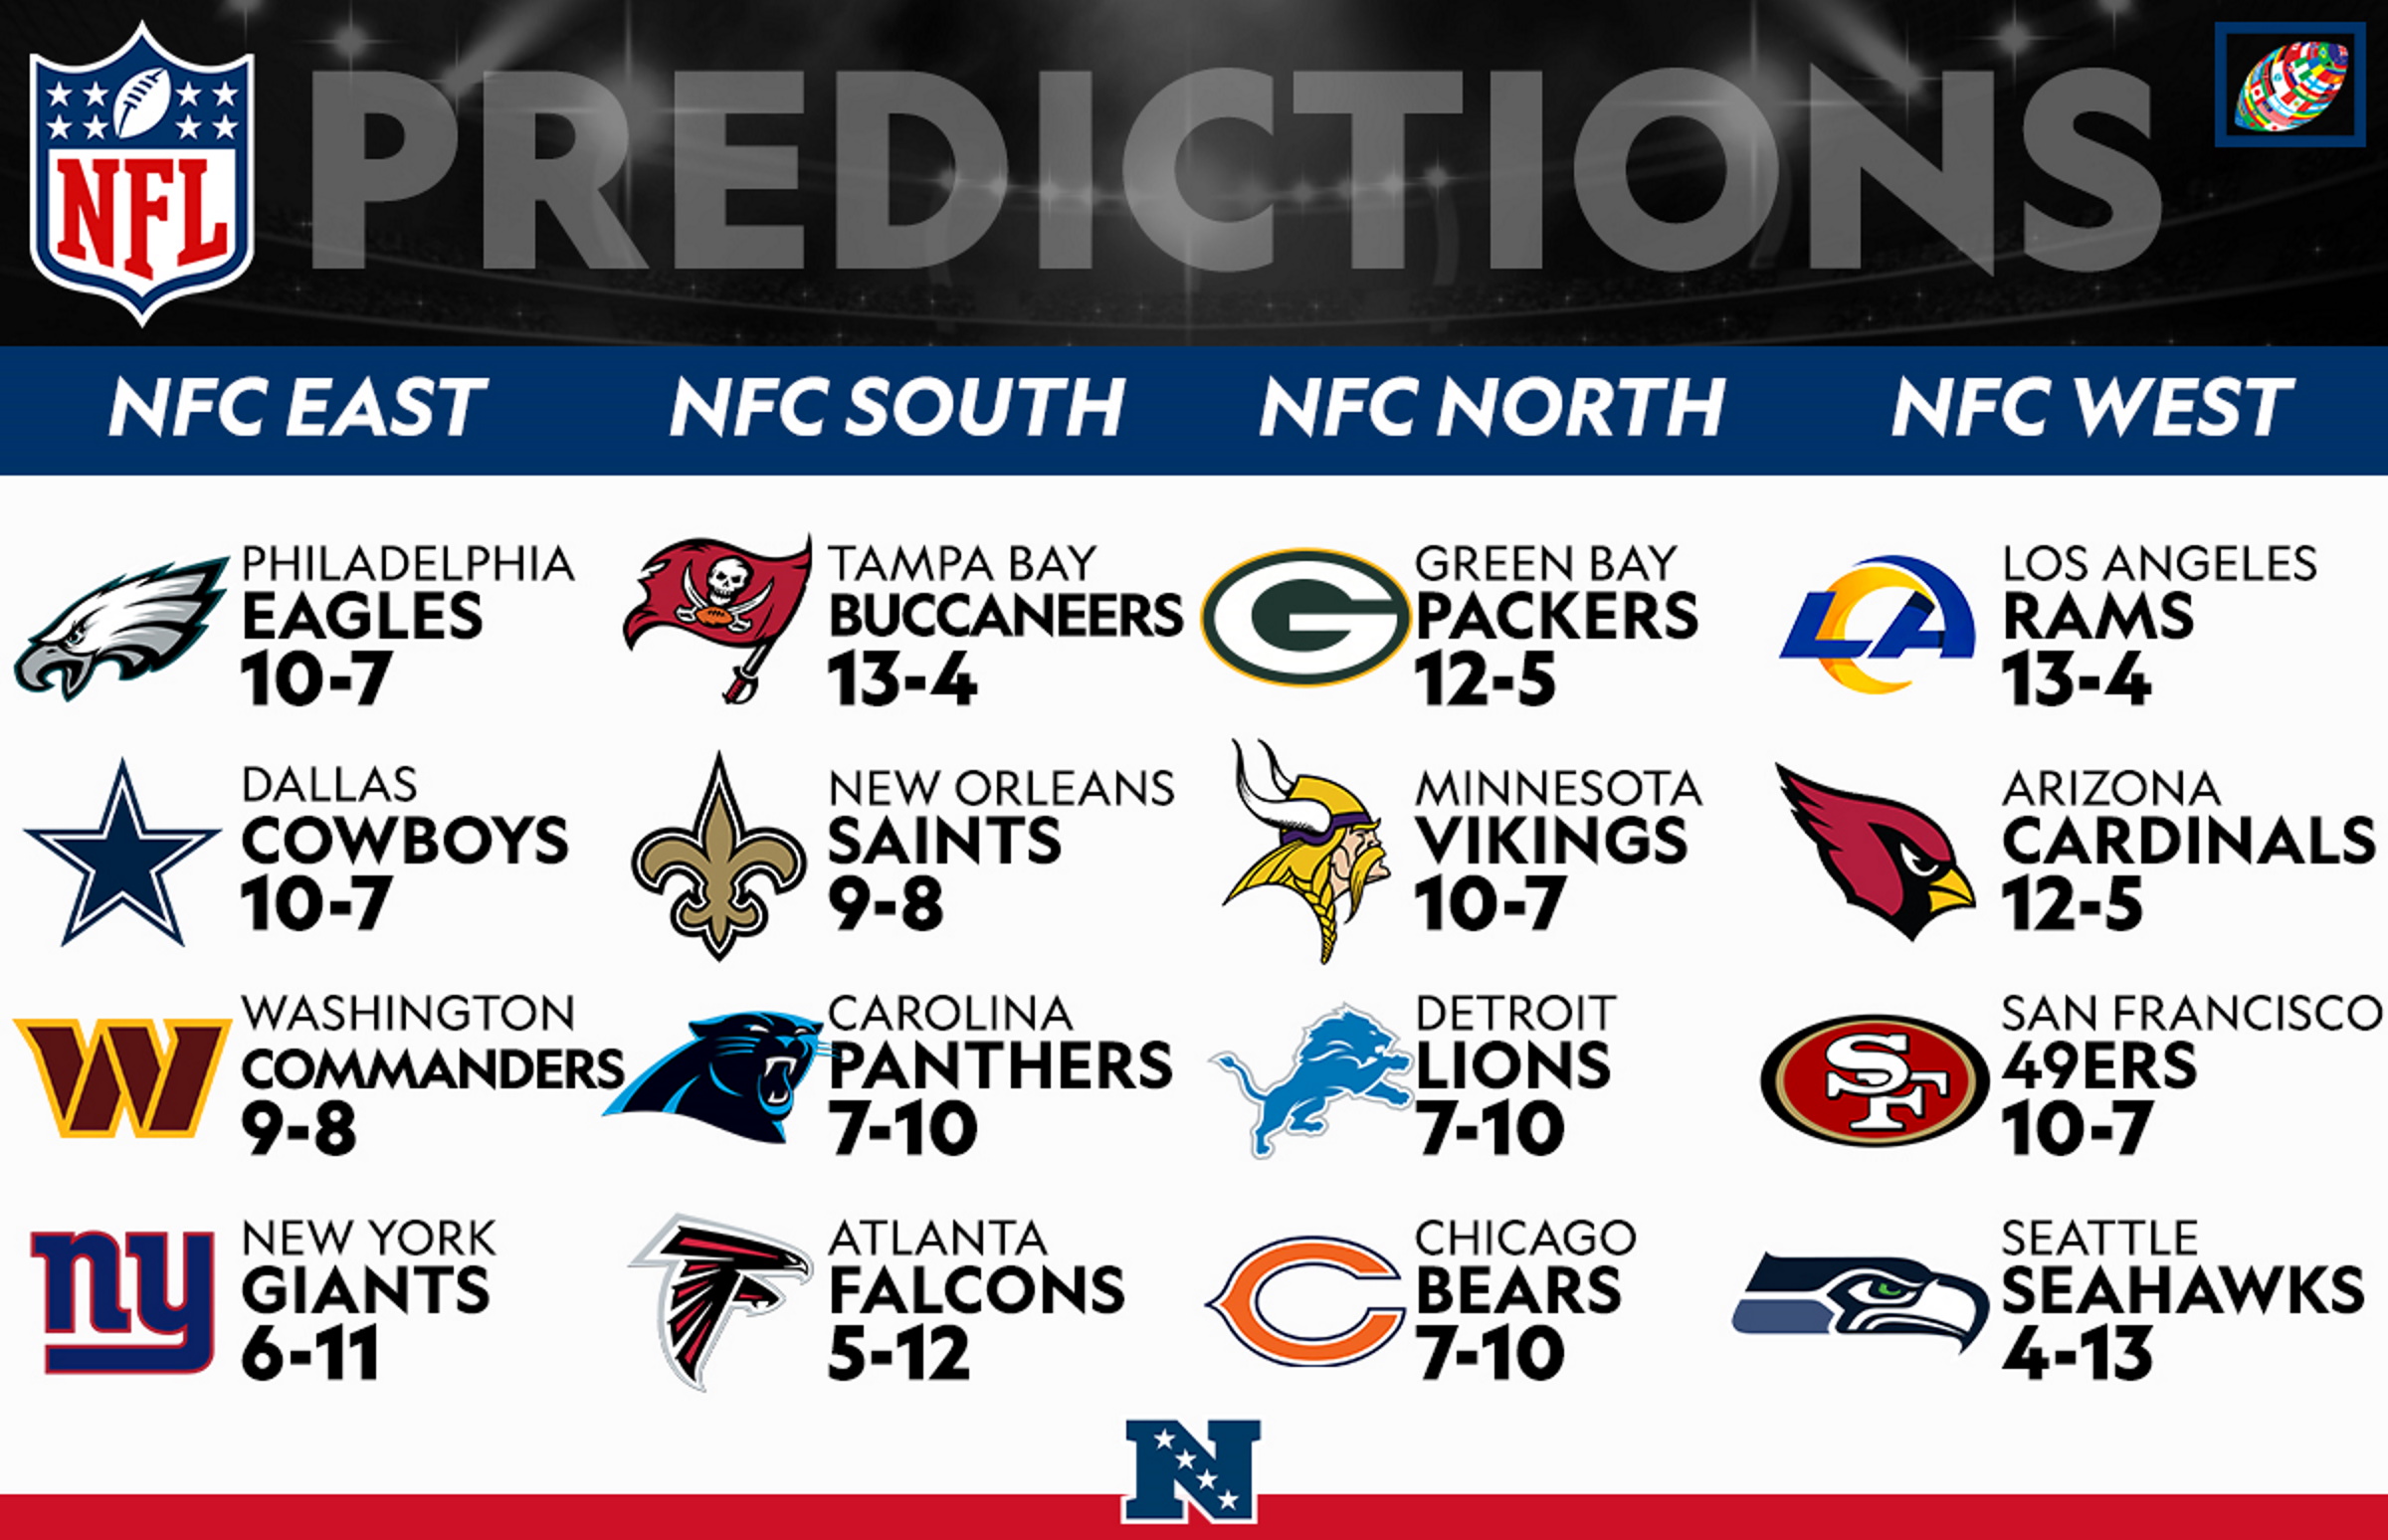 NFL: Predicting the NFC Divisional standings for the 2022 season